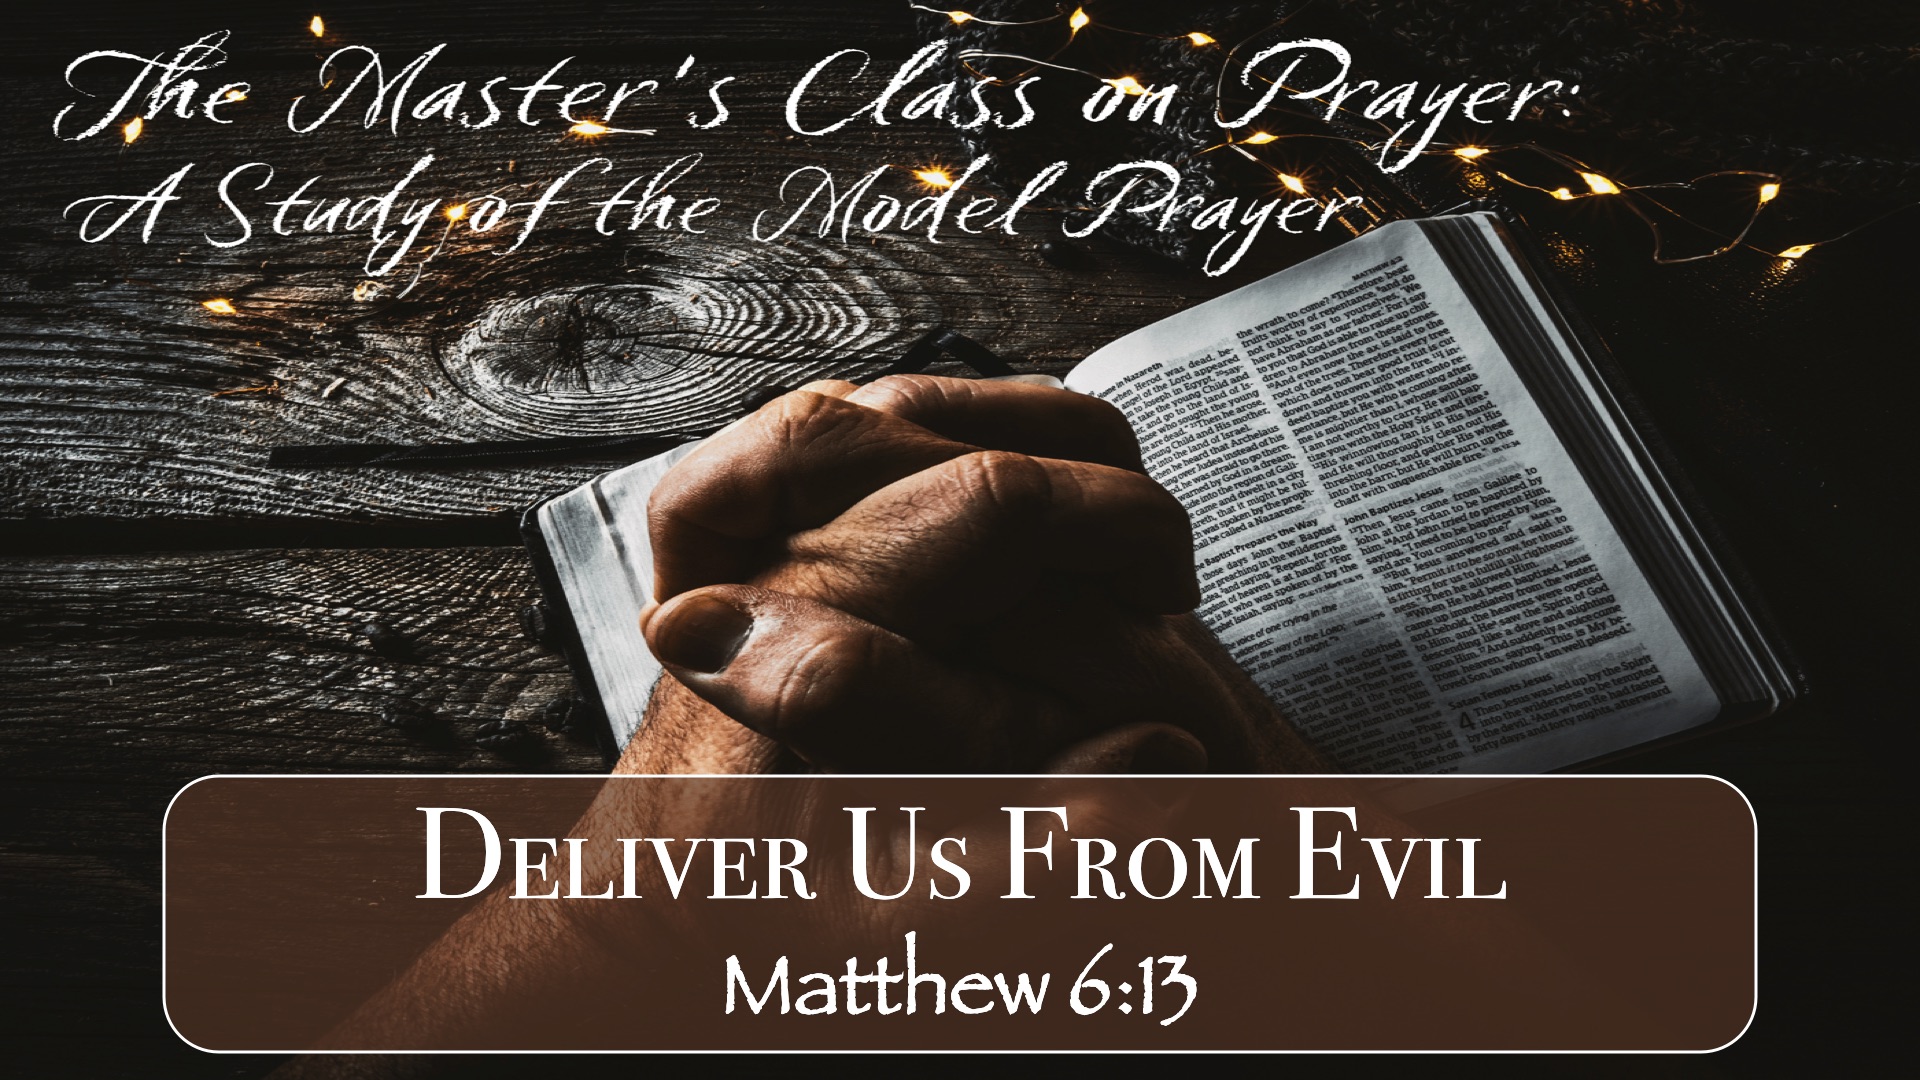 “Master’s Class on Prayer Deliver Us from Evil”